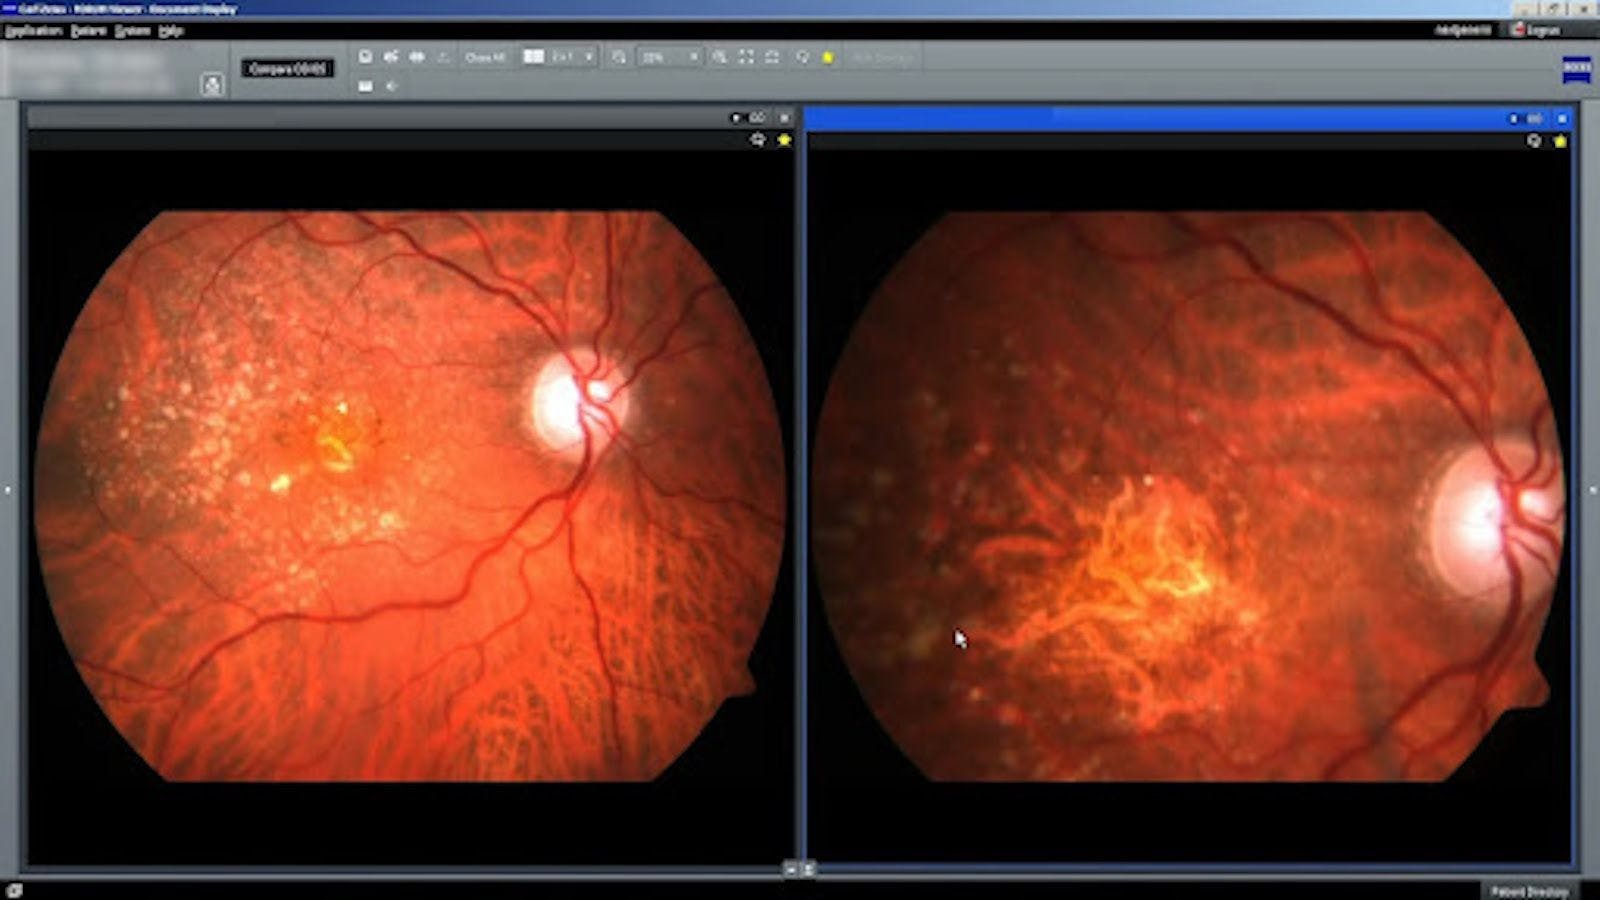 Fundus photography shows geographic atrophy